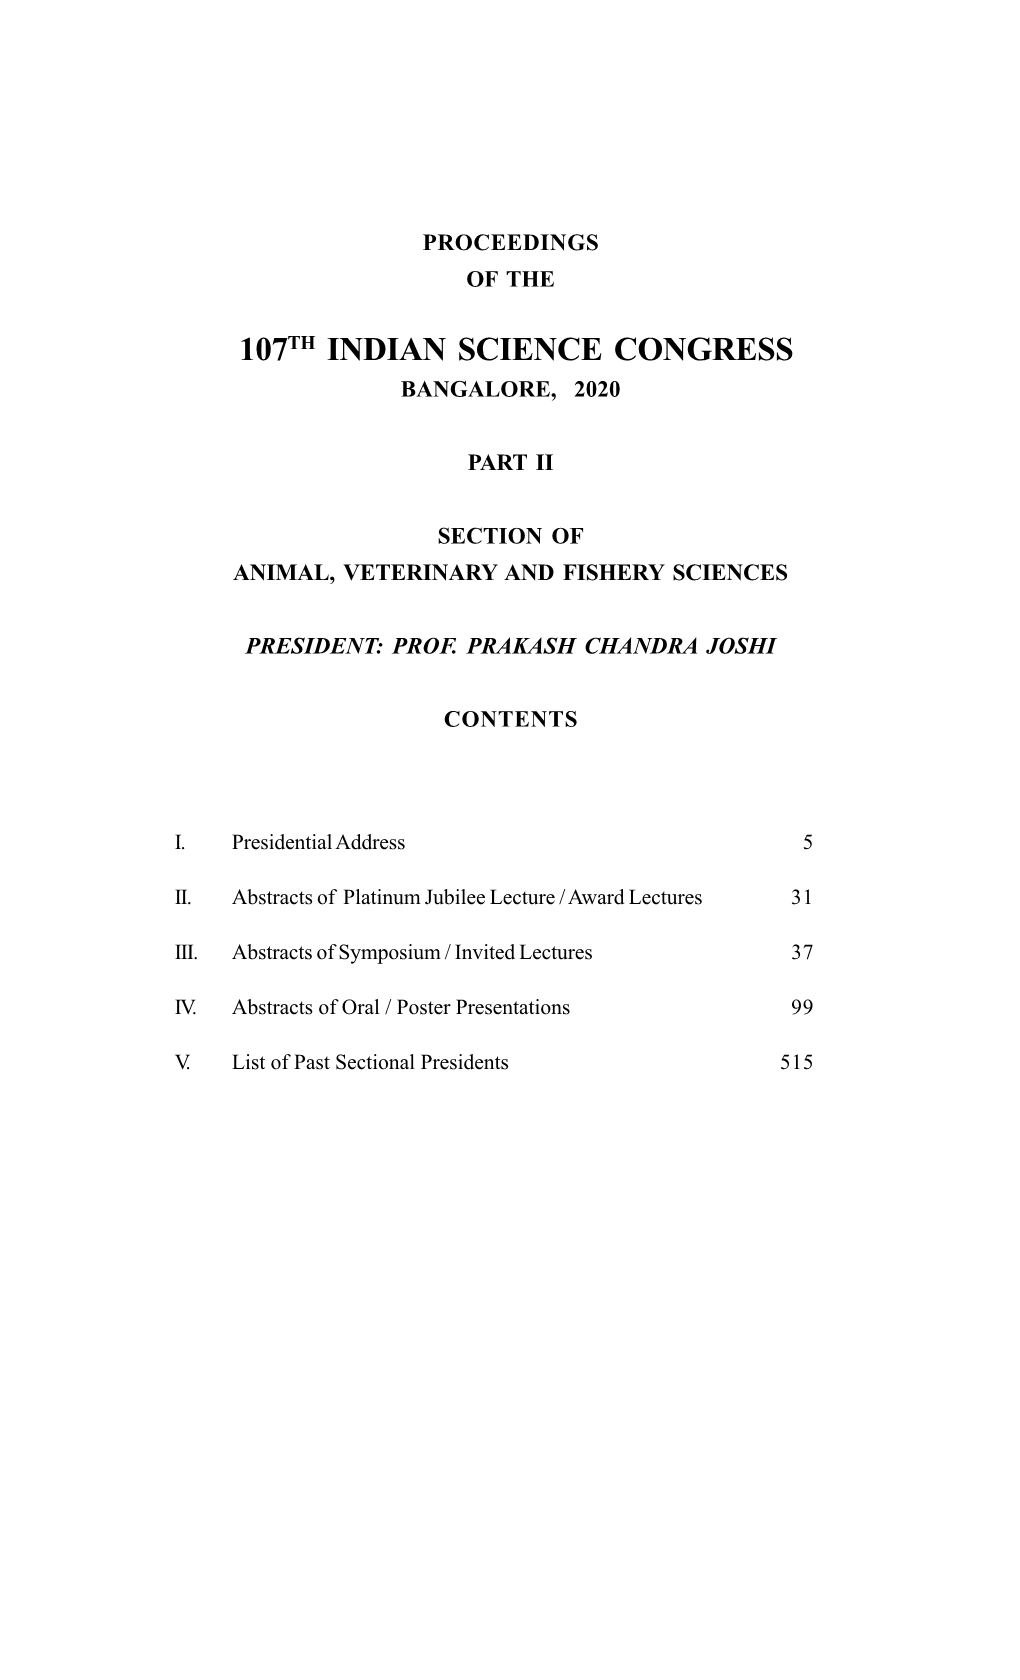 Abstracts of 107Th ISC Animal, Veterinary and Fishery Sciences